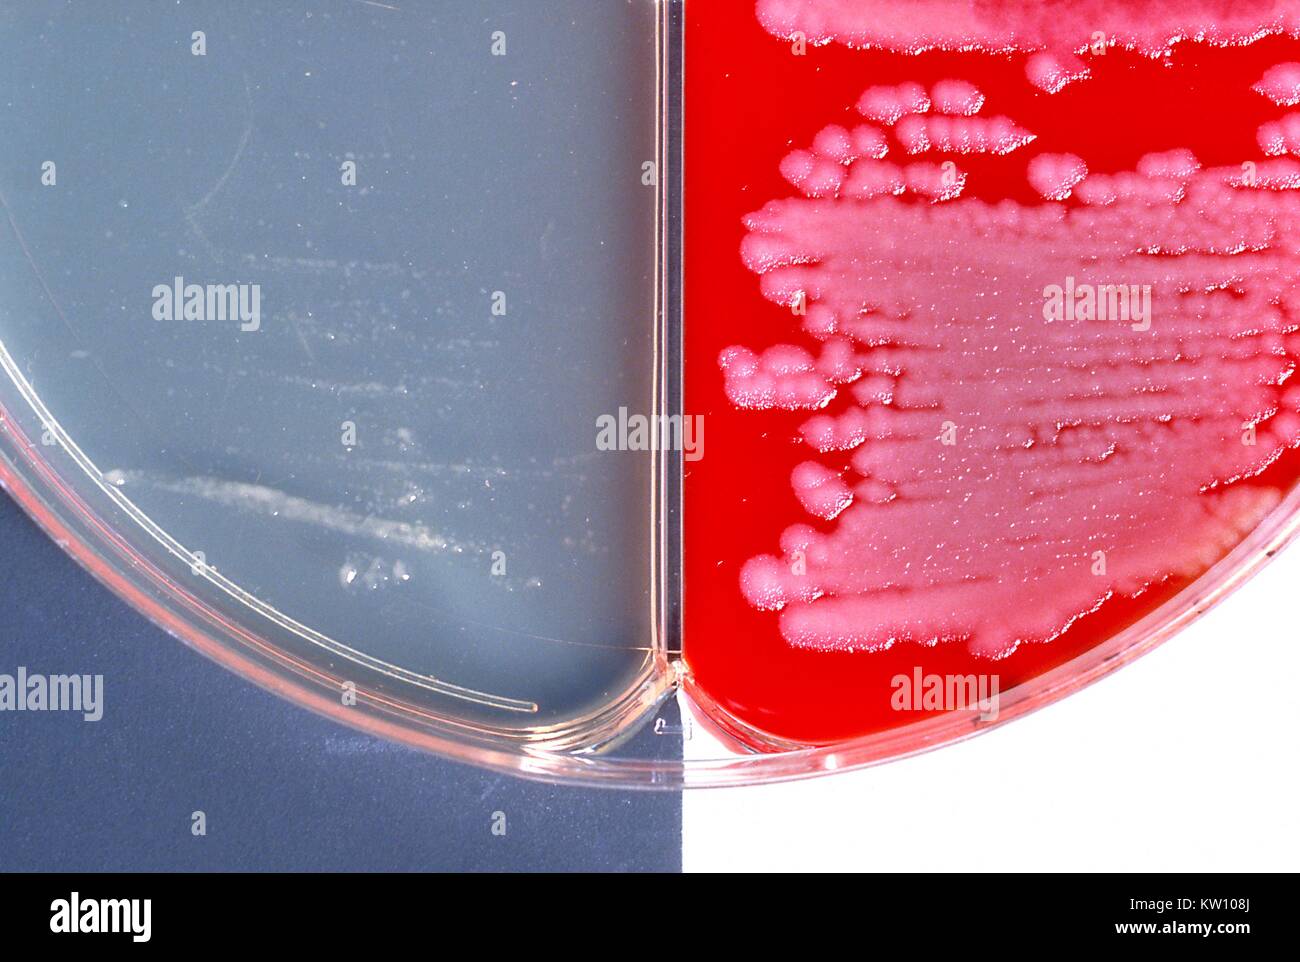 Bacillus anthracis positive encapsulation test is demonstrated using two different agar media. Note the presence of rough colonies on the blood agar medium (right), and smooth colonies on the bicarbonate agar medium (left) . Image courtesy CDC/Dr. James Feeley, 1980. Stock Photo